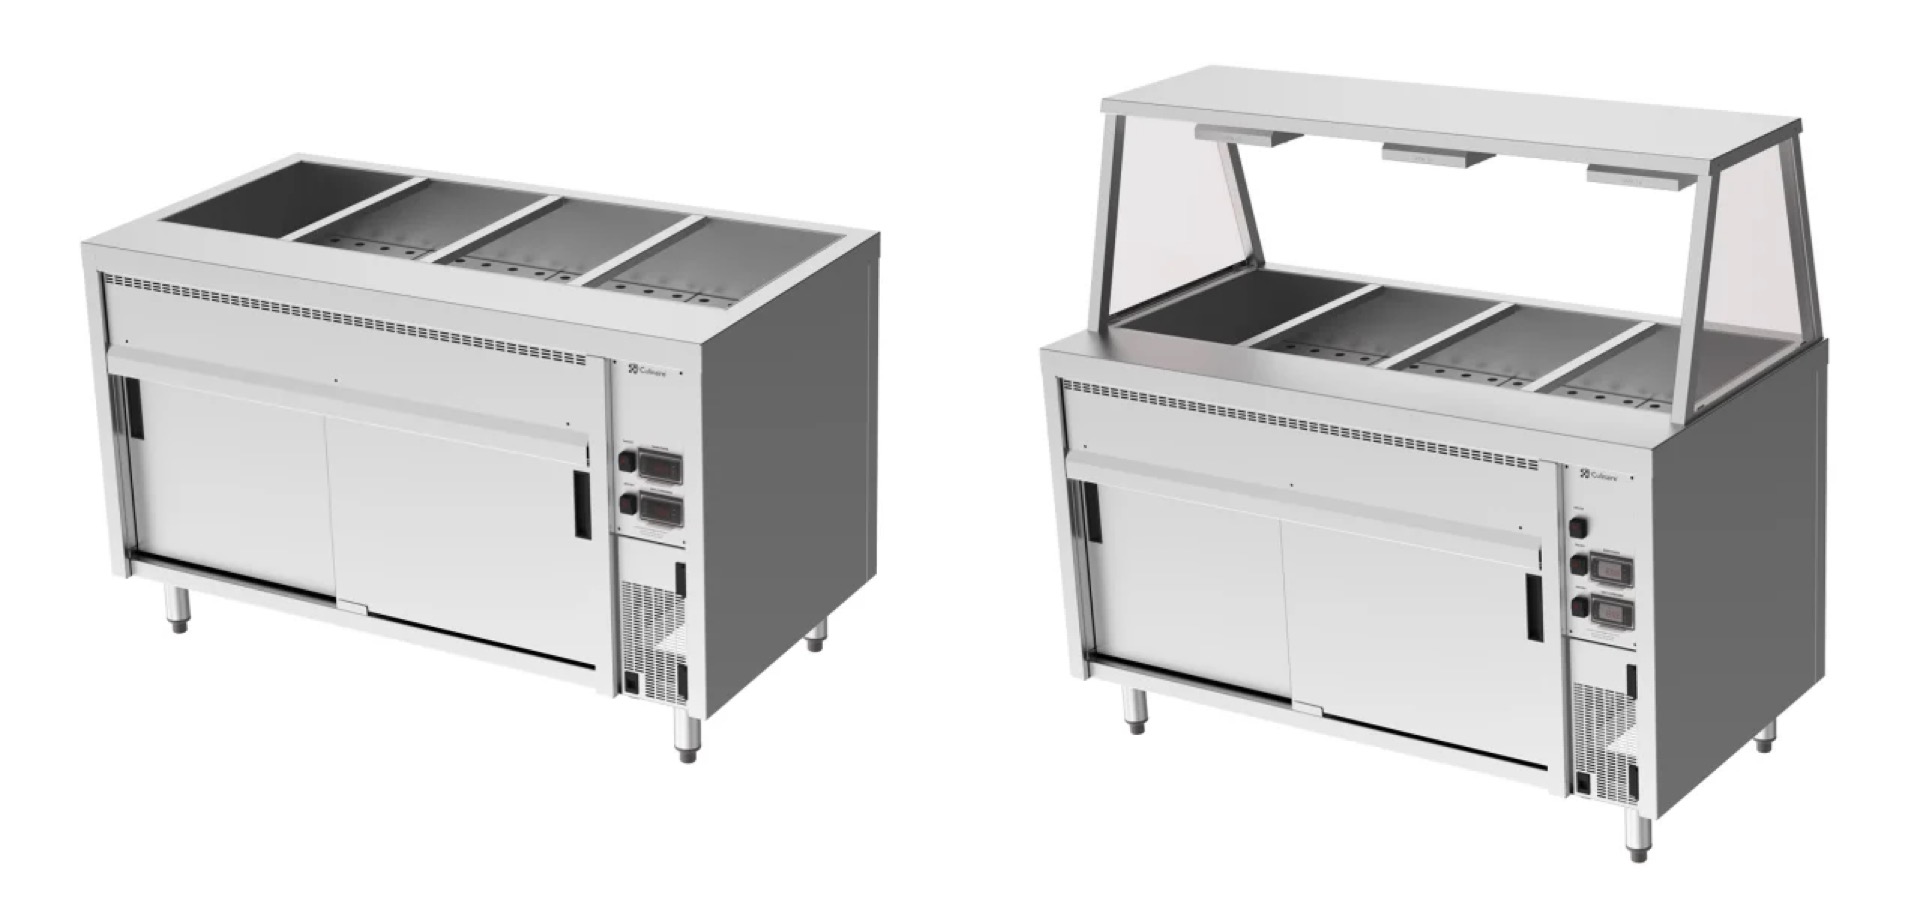 Stop Serving Lukewarm Slop - Maintain Piping Hot Food with the Culinaire Bain Marie